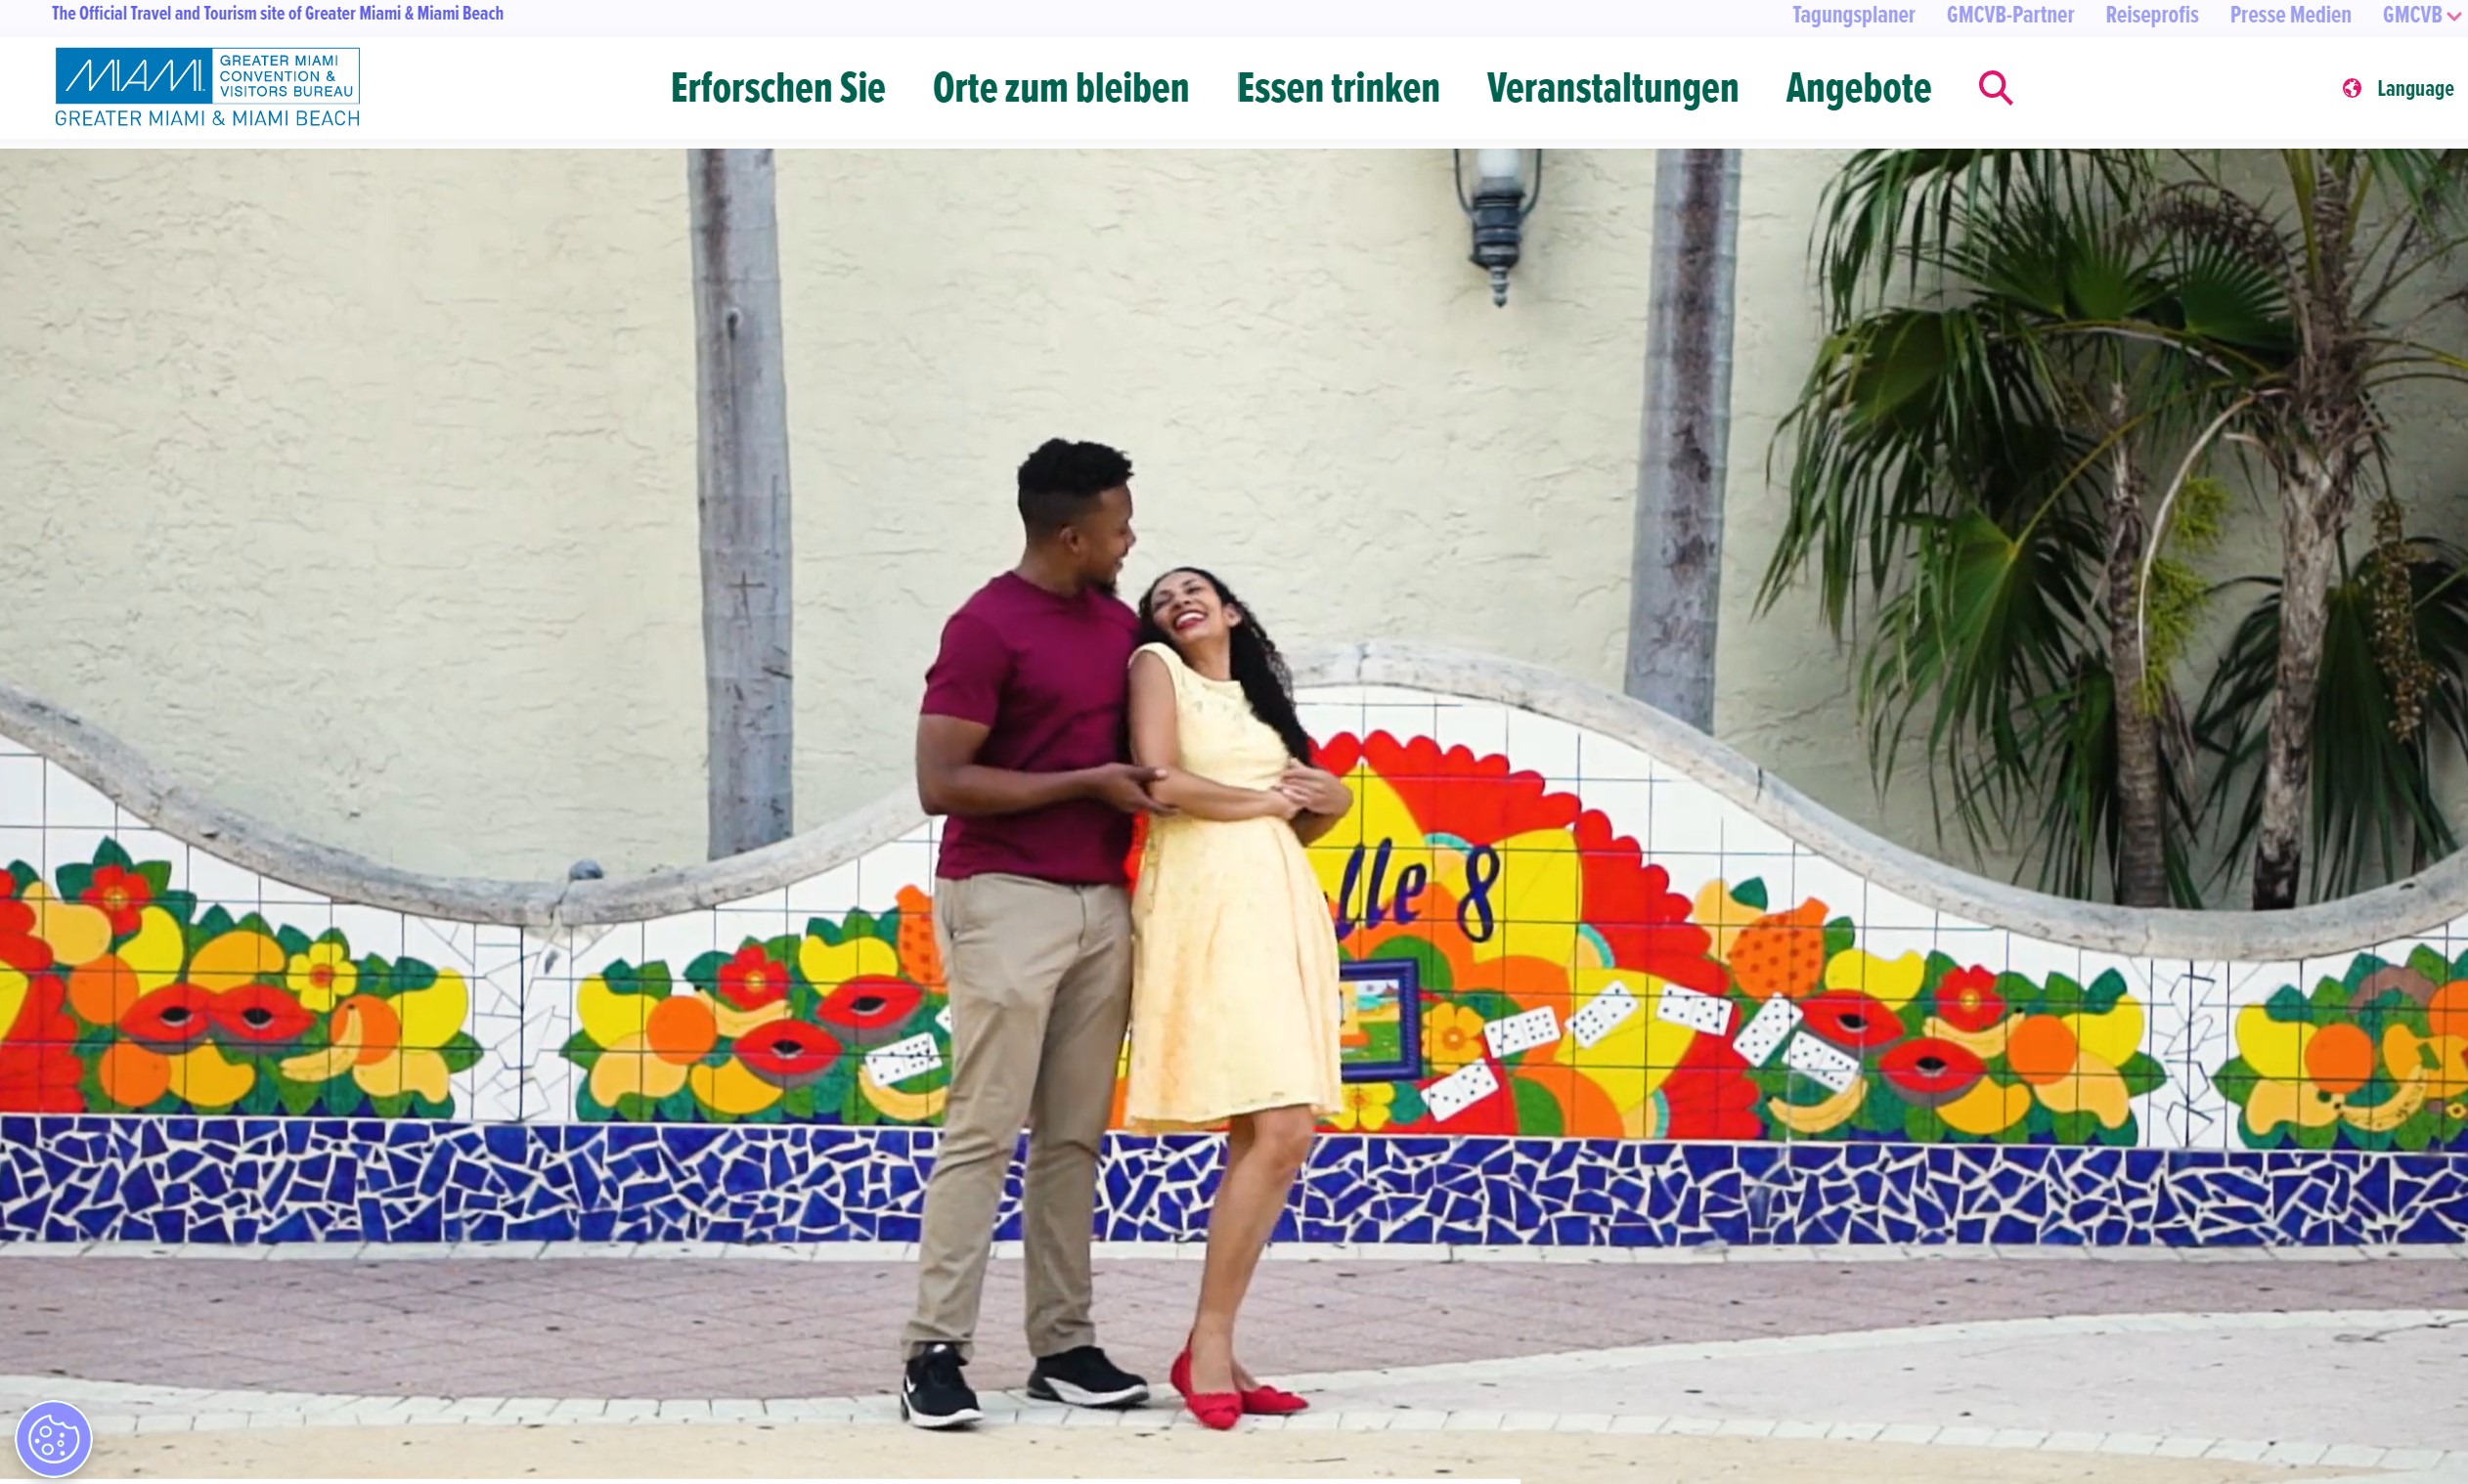 The Official Travel and Tourism site of Greater Miami & Miami